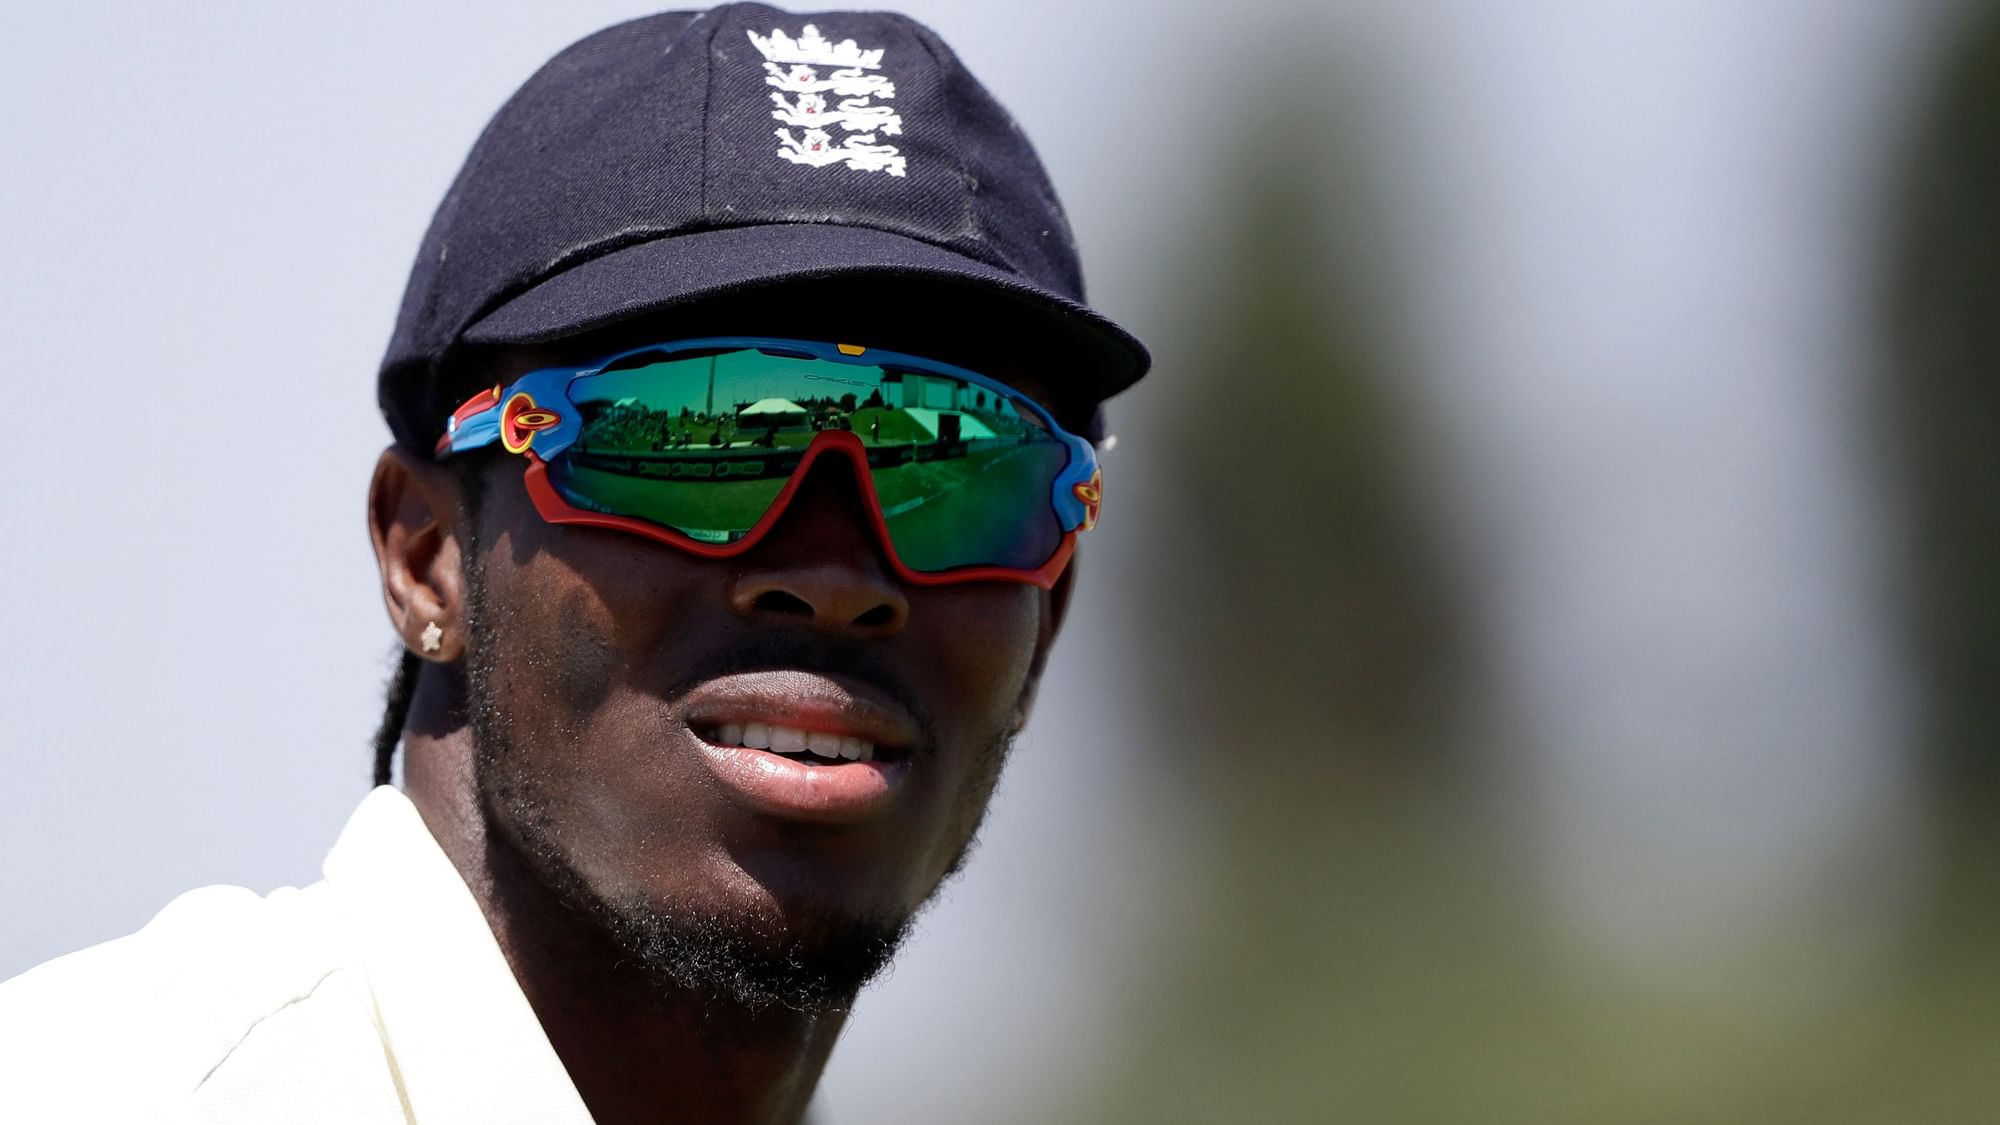 England fast bowler Jofra Archer has got over the recent racial abuse incident in New Zealand, saying that he has moved on.